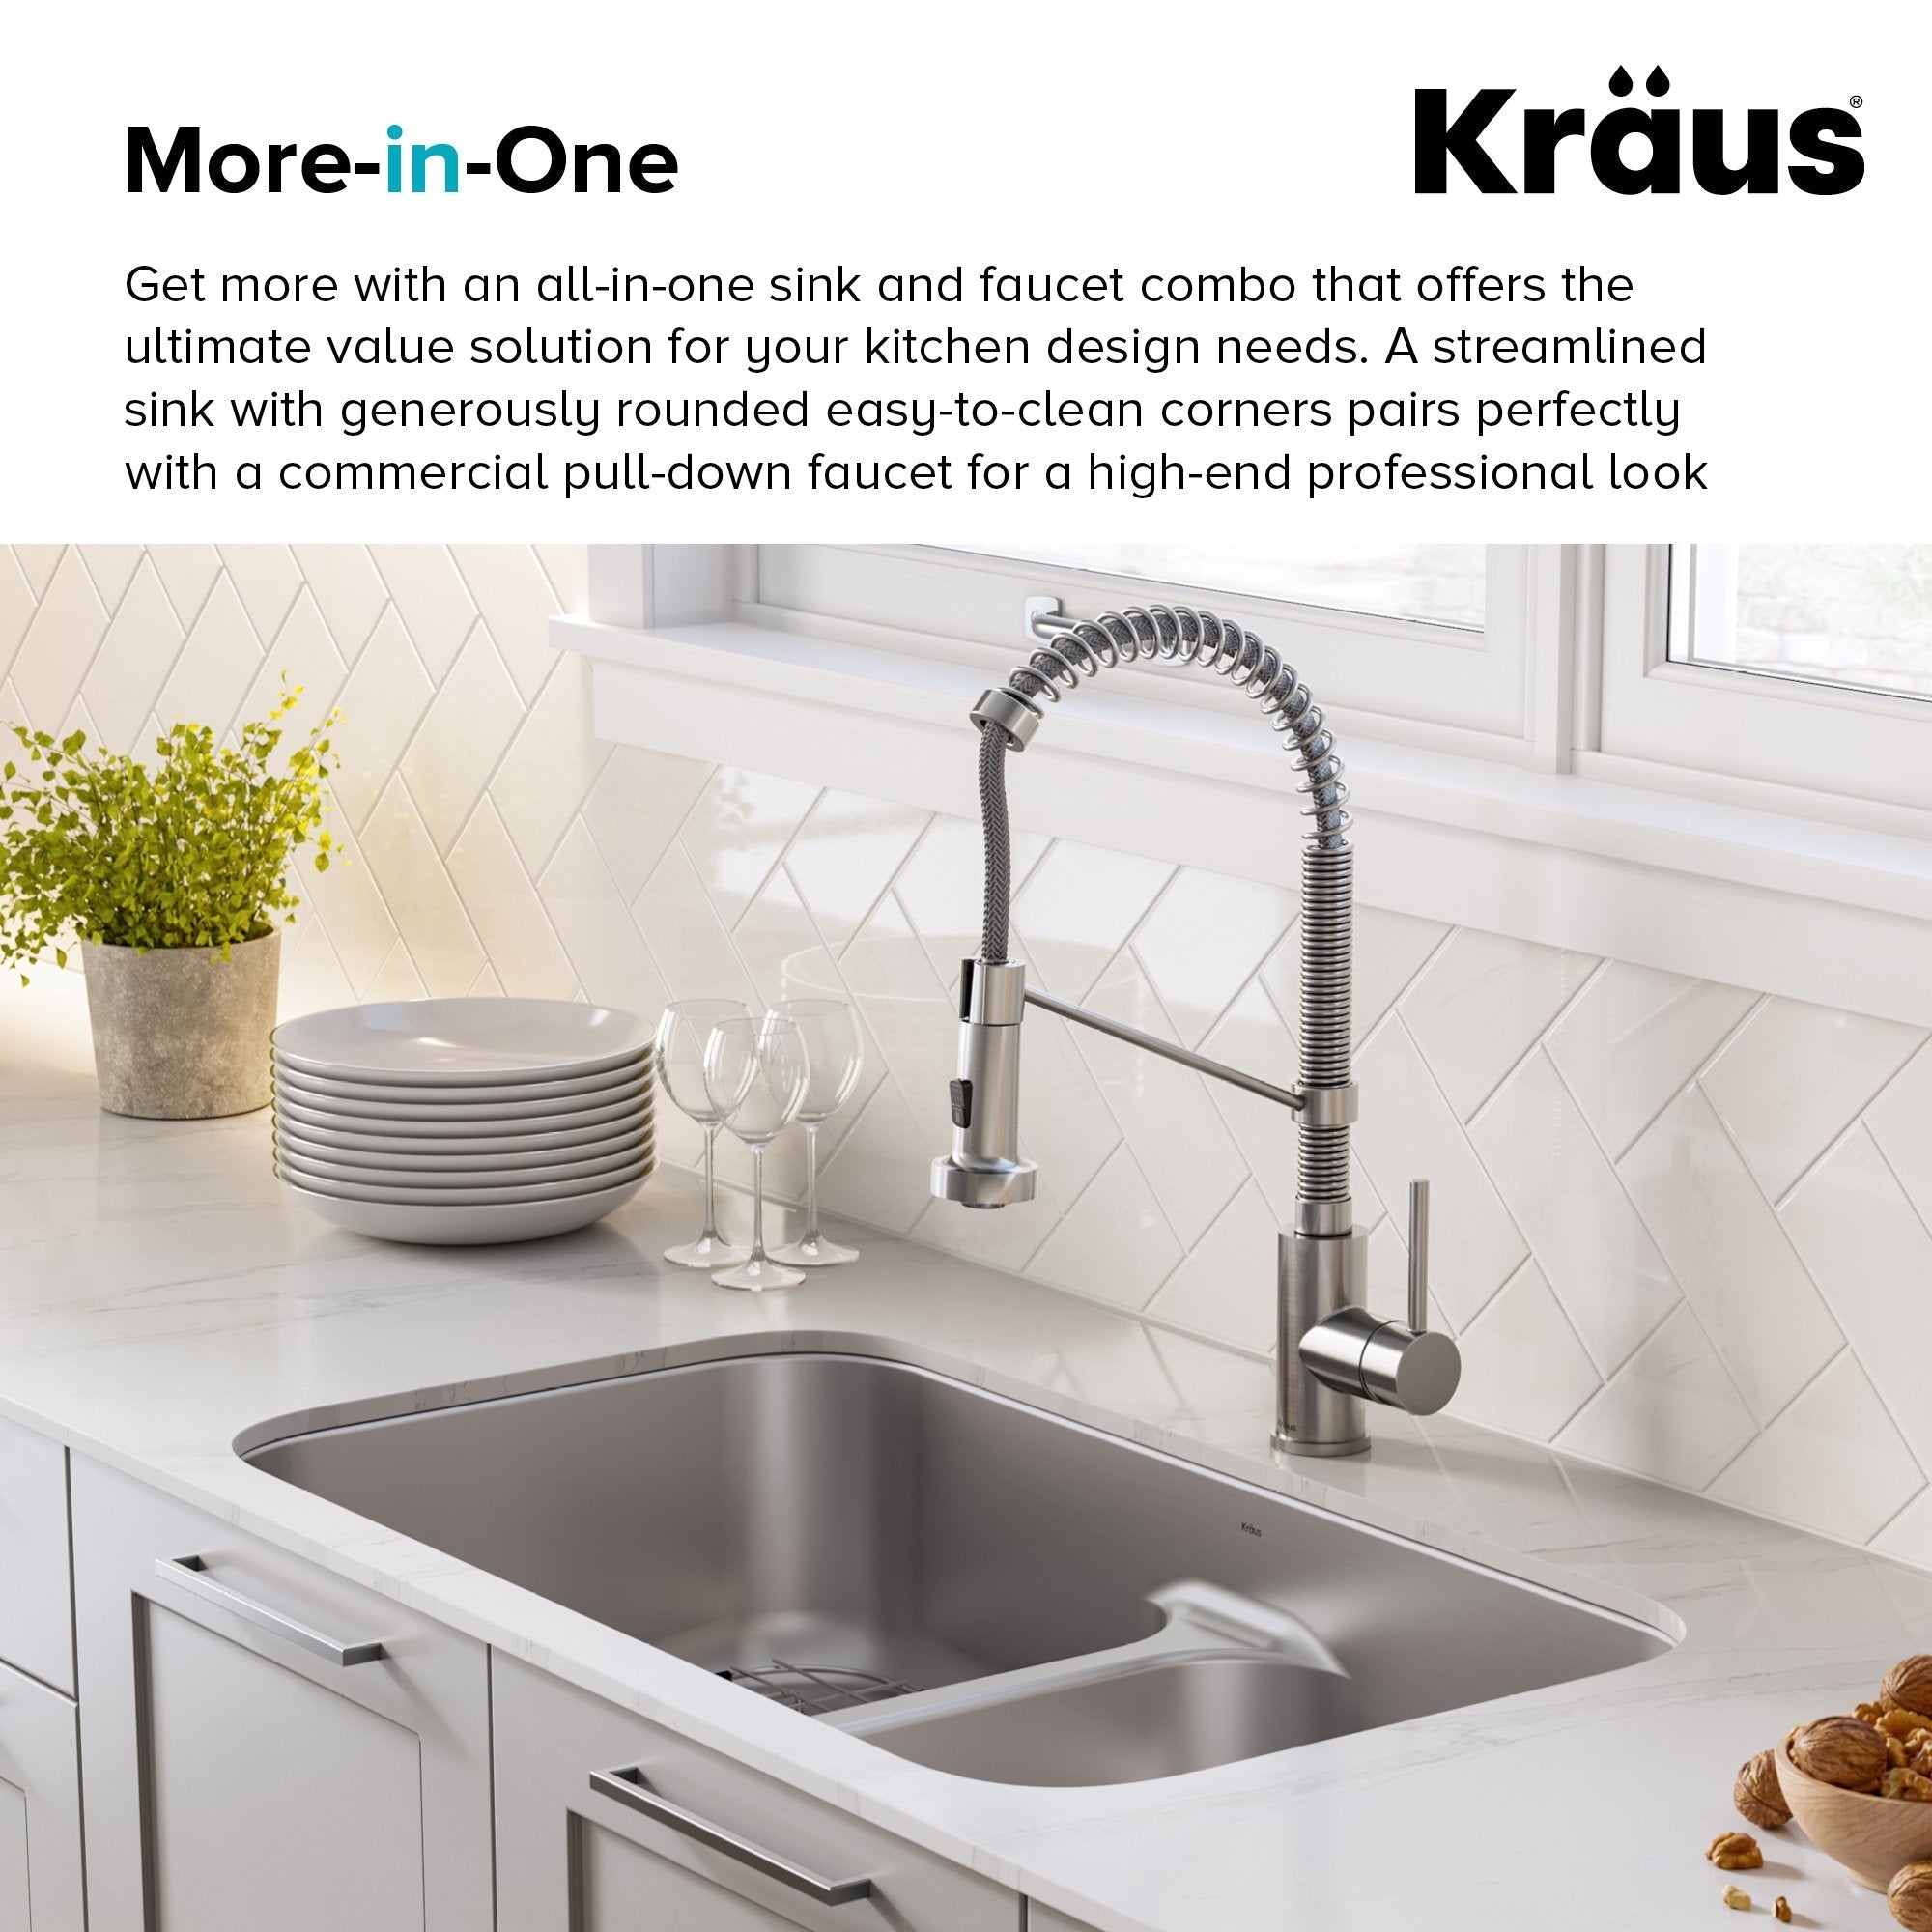 Kraus KCA-1200 Ellis 33-inch 16 Gauge Undermount Kitchen Sink Combo Set with Bolden 18-inch Pull-Down Commercial Kitchen Faucet in Stainless Steel